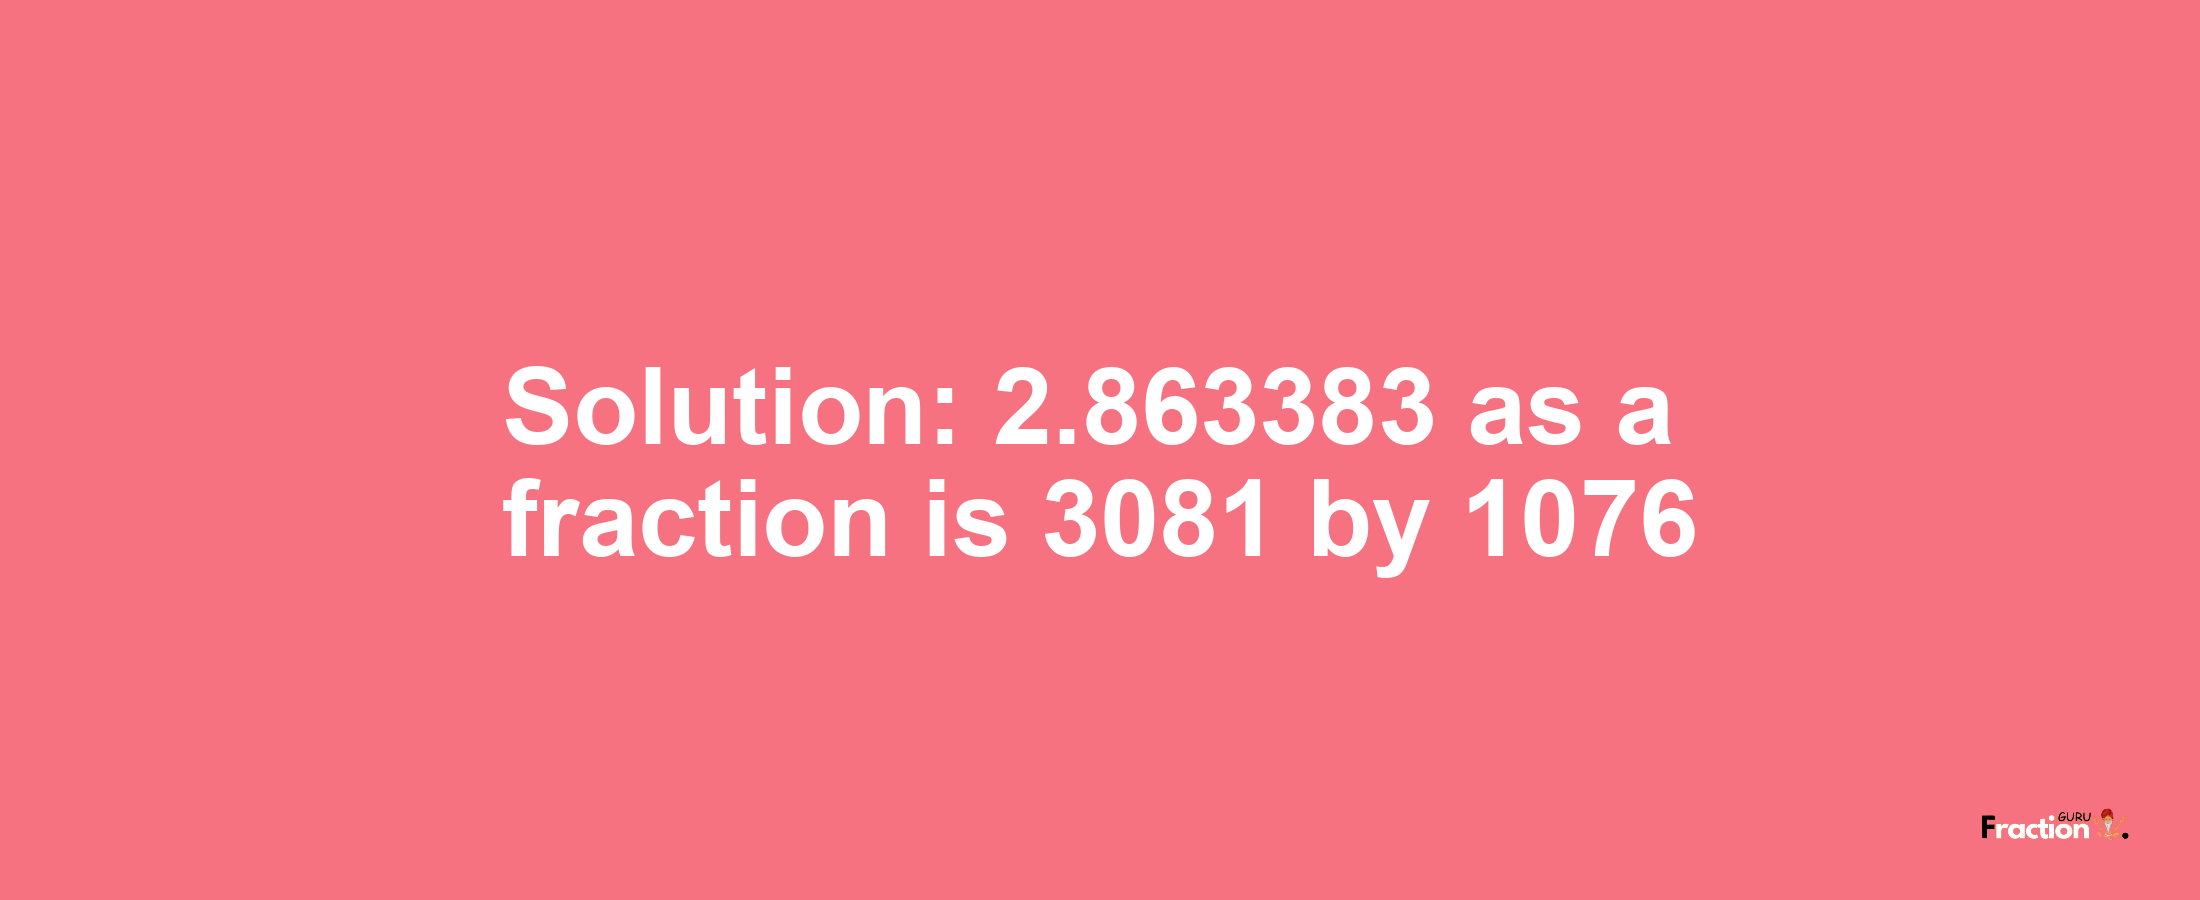 Solution:2.863383 as a fraction is 3081/1076